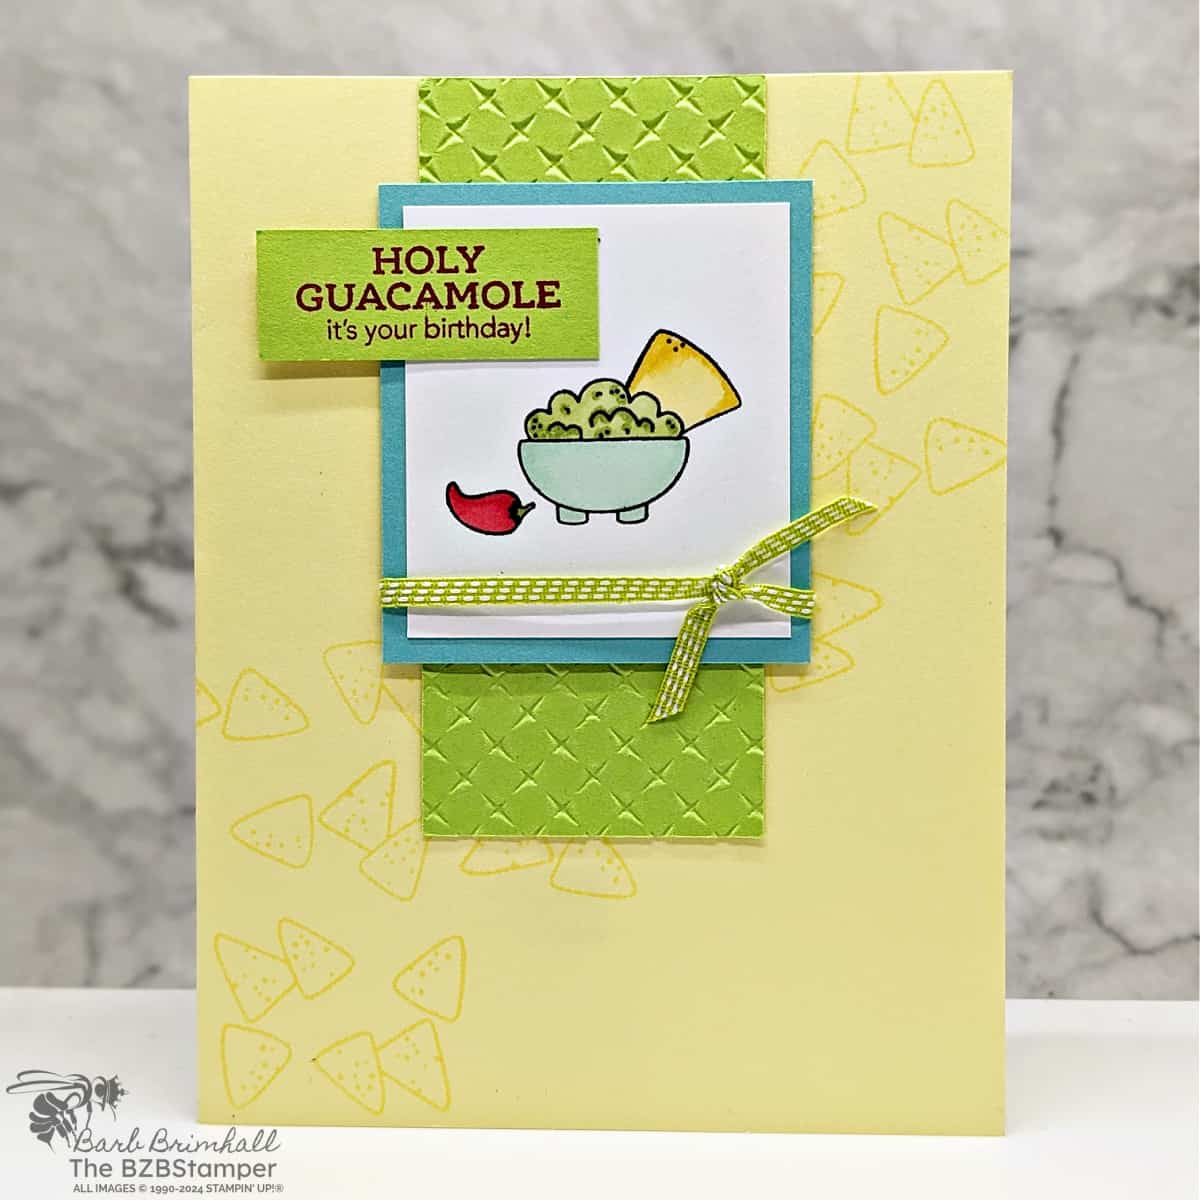 The Taco Fiesta Stamp Set in yellow, green and blue featuring a guacamole bowl with chips and a Birthday Sentiment.